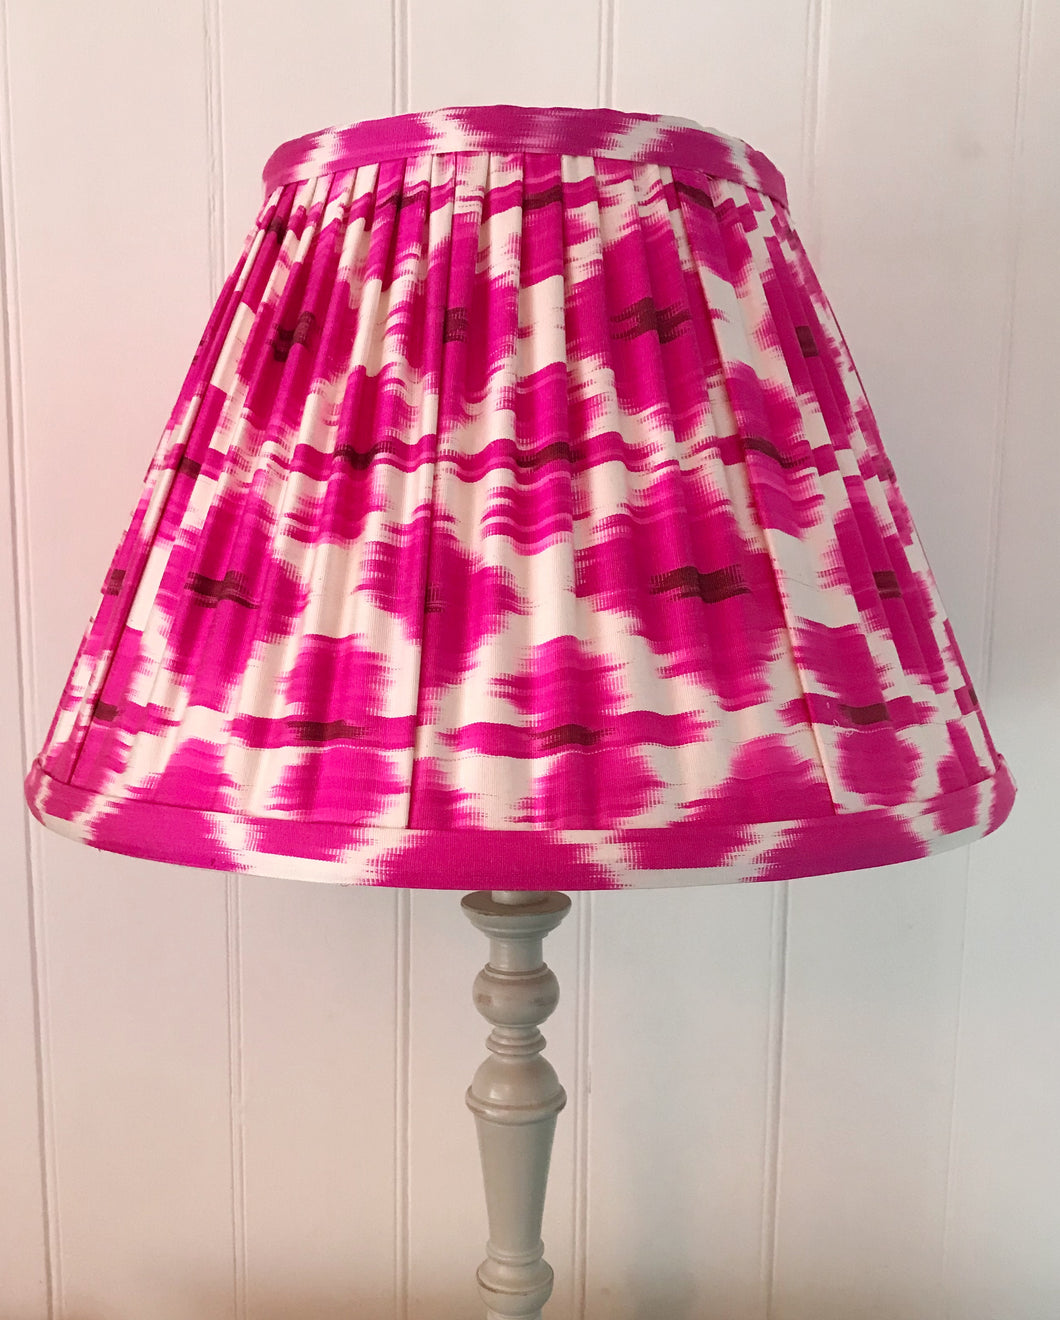 46cm Pleated Pink Ikat Lampshade - Hot Pink & White